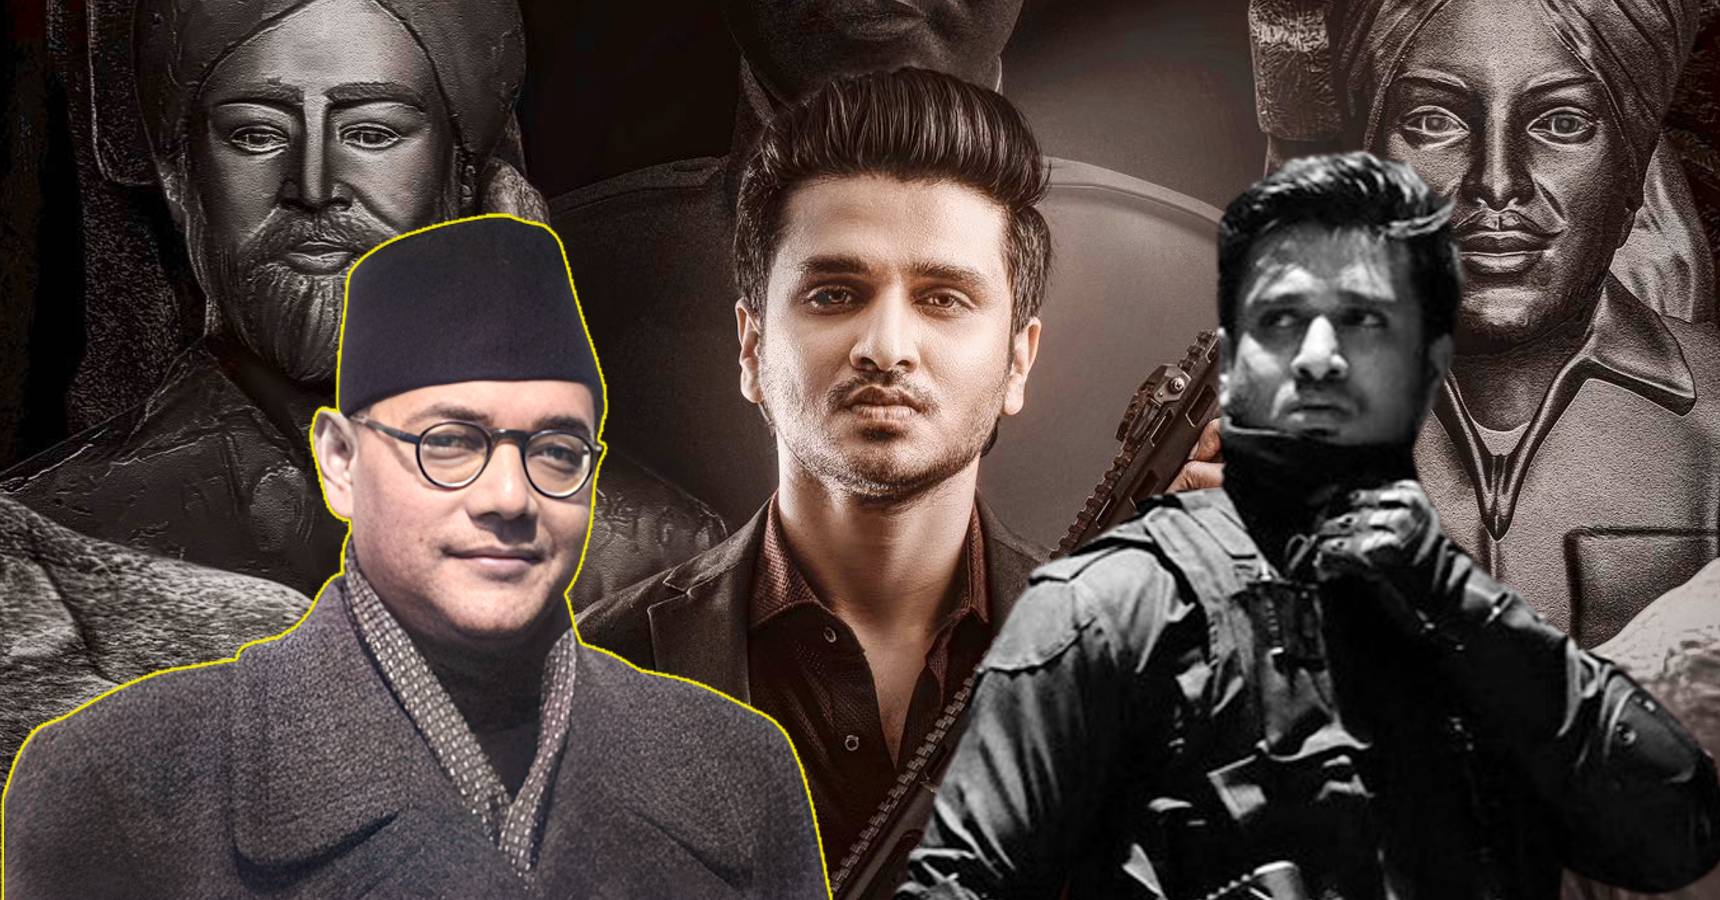 South Indian movie Spy to release about mysteries about Netaji Subhash Chandra Bose